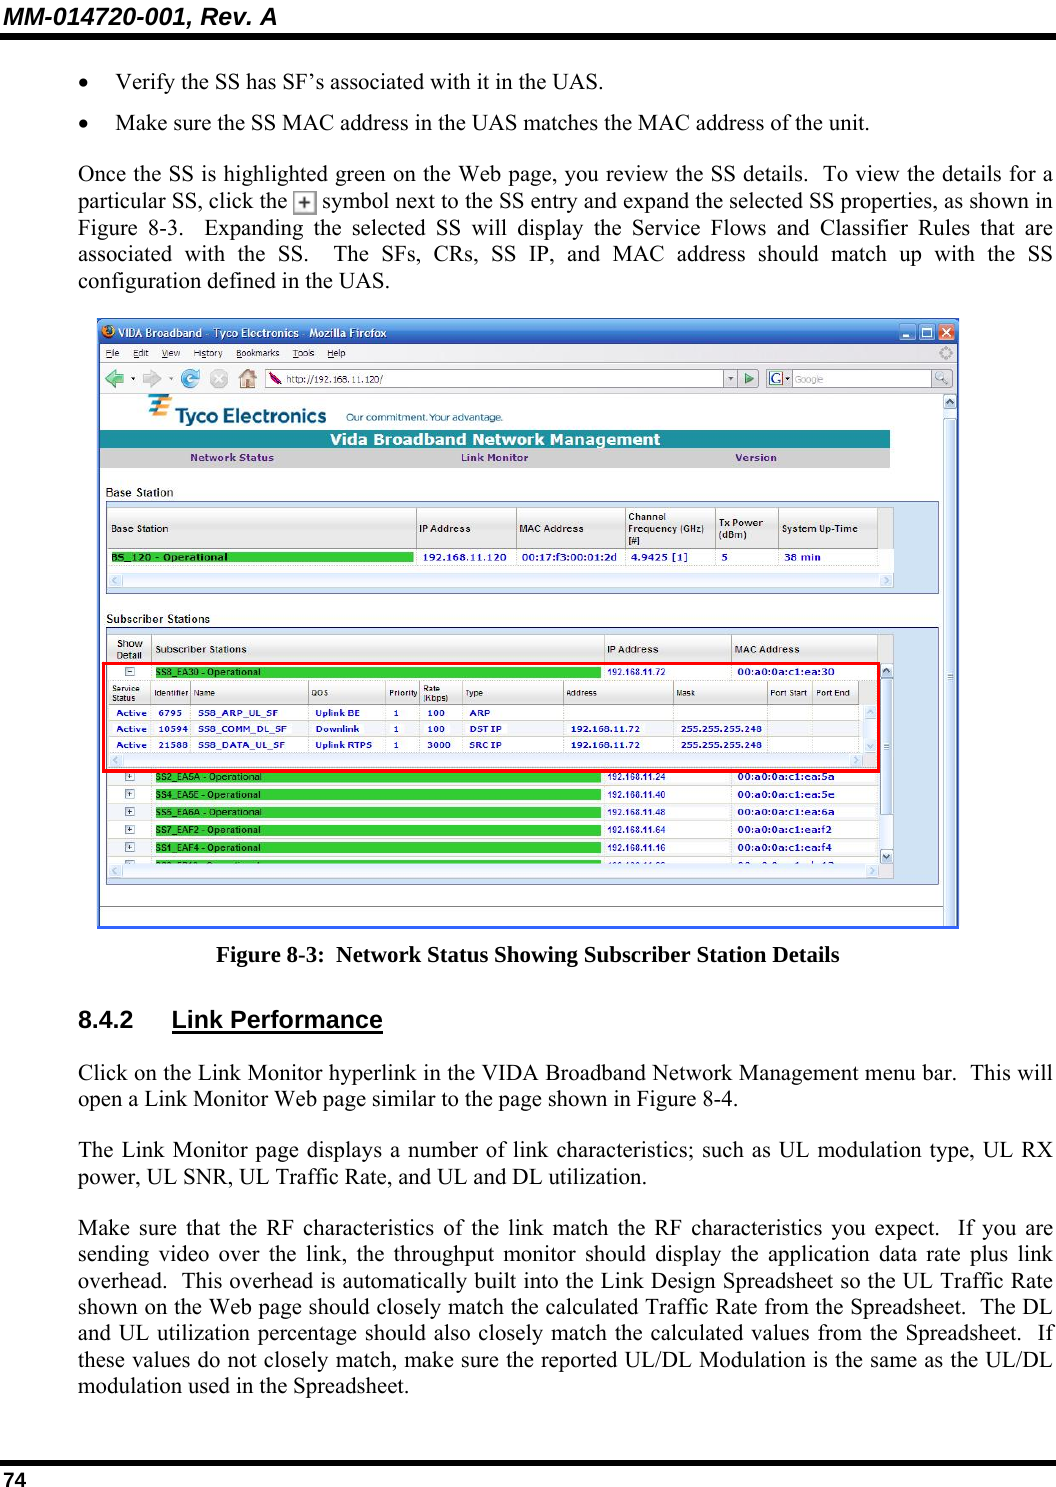 MM-014720-001, Rev. A 74 • Verify the SS has SF’s associated with it in the UAS.   • Make sure the SS MAC address in the UAS matches the MAC address of the unit.  Once the SS is highlighted green on the Web page, you review the SS details.  To view the details for a particular SS, click the   symbol next to the SS entry and expand the selected SS properties, as shown in Figure 8-3.  Expanding the selected SS will display the Service Flows and Classifier Rules that are associated with the SS.  The SFs, CRs, SS IP, and MAC address should match up with the SS configuration defined in the UAS.   Figure 8-3:  Network Status Showing Subscriber Station Details 8.4.2 Link Performance Click on the Link Monitor hyperlink in the VIDA Broadband Network Management menu bar.  This will open a Link Monitor Web page similar to the page shown in Figure 8-4. The Link Monitor page displays a number of link characteristics; such as UL modulation type, UL RX power, UL SNR, UL Traffic Rate, and UL and DL utilization.   Make sure that the RF characteristics of the link match the RF characteristics you expect.  If you are sending video over the link, the throughput monitor should display the application data rate plus link overhead.  This overhead is automatically built into the Link Design Spreadsheet so the UL Traffic Rate shown on the Web page should closely match the calculated Traffic Rate from the Spreadsheet.  The DL and UL utilization percentage should also closely match the calculated values from the Spreadsheet.  If these values do not closely match, make sure the reported UL/DL Modulation is the same as the UL/DL modulation used in the Spreadsheet.   